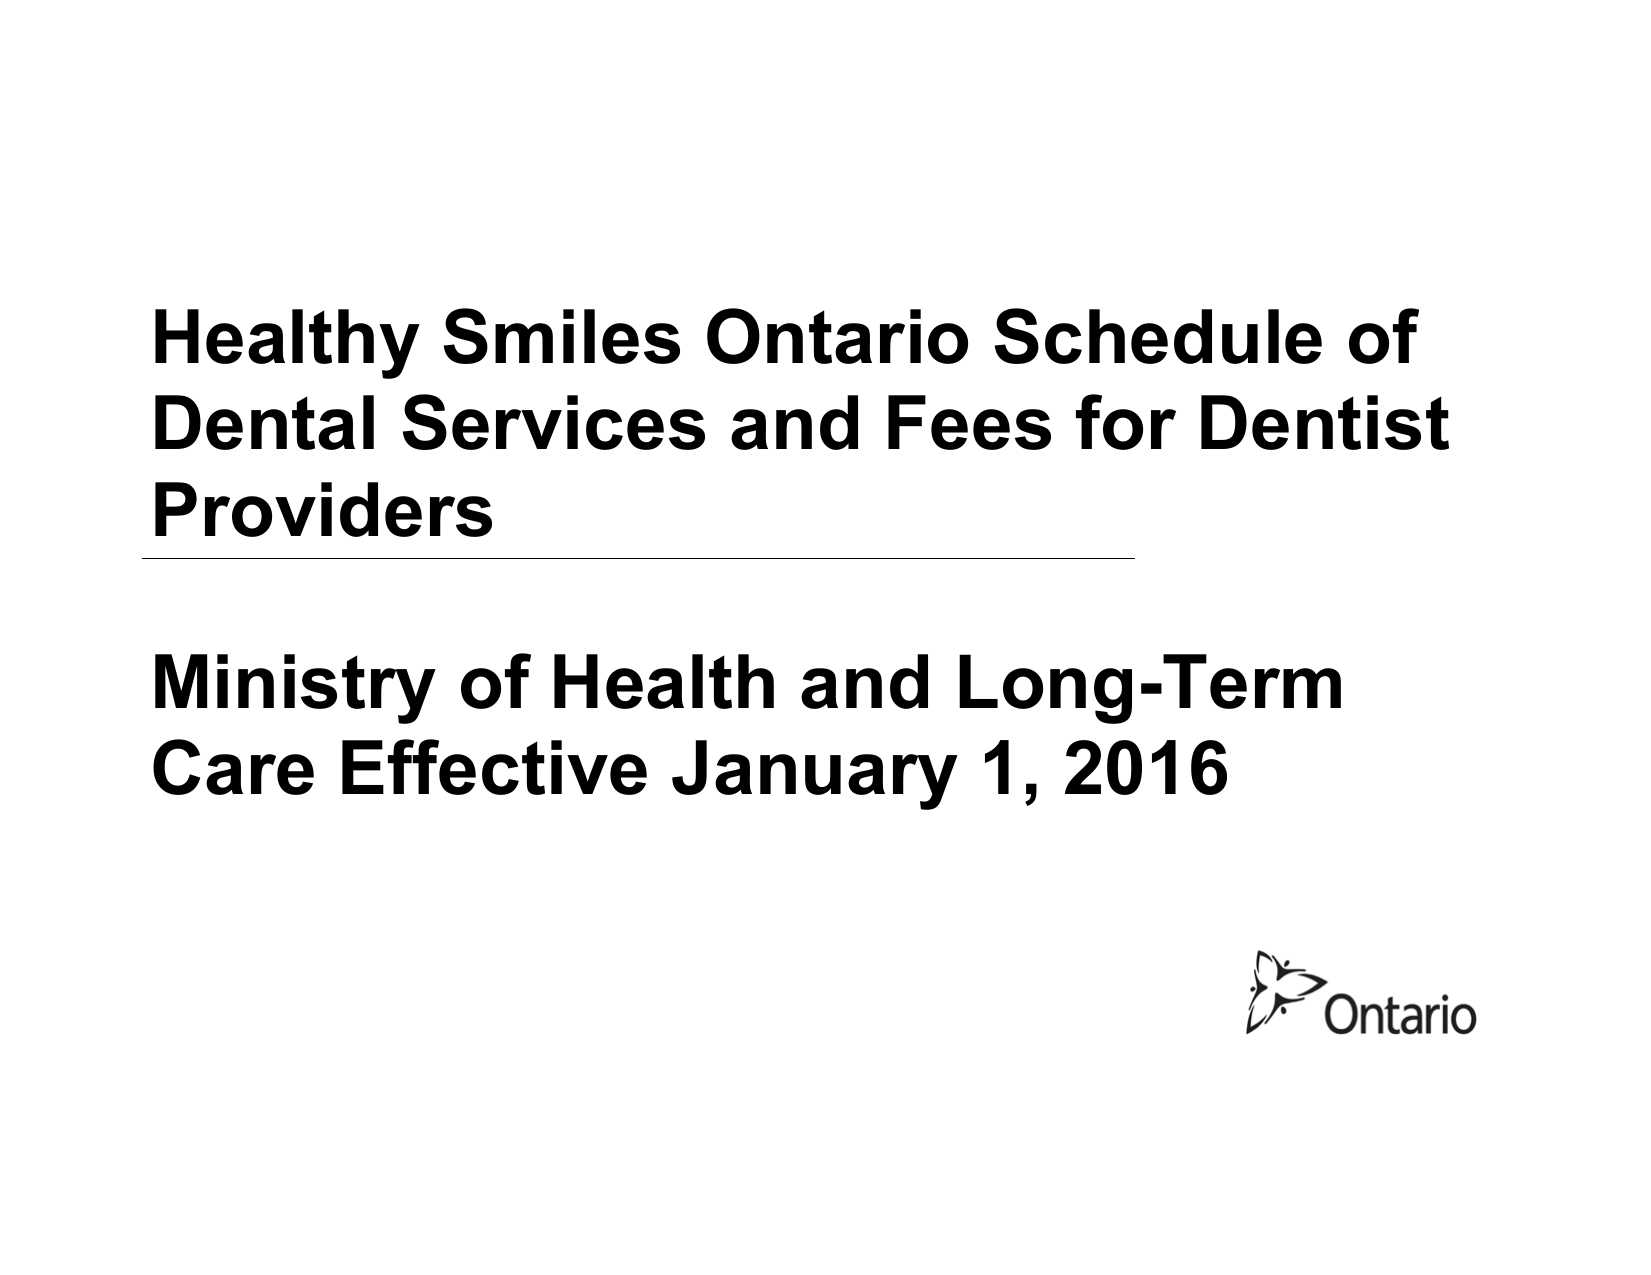 Healthy Smiles Ontario Schedule of Dental Services and Fees for